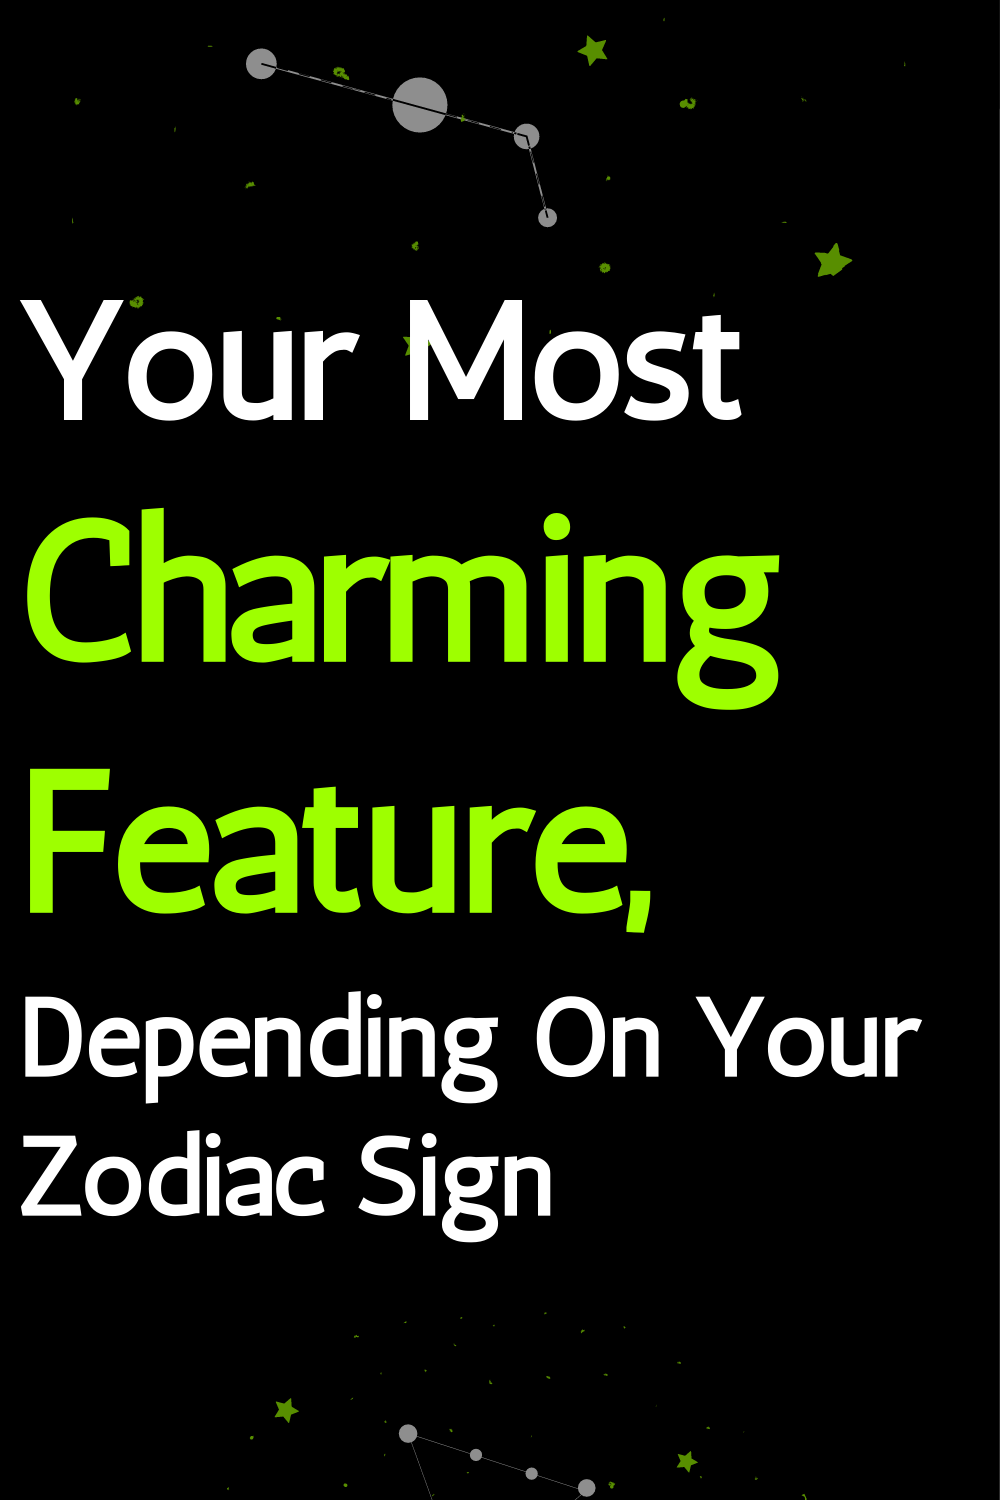 Your Most Charming Feature, Depending On Your Zodiac Sign